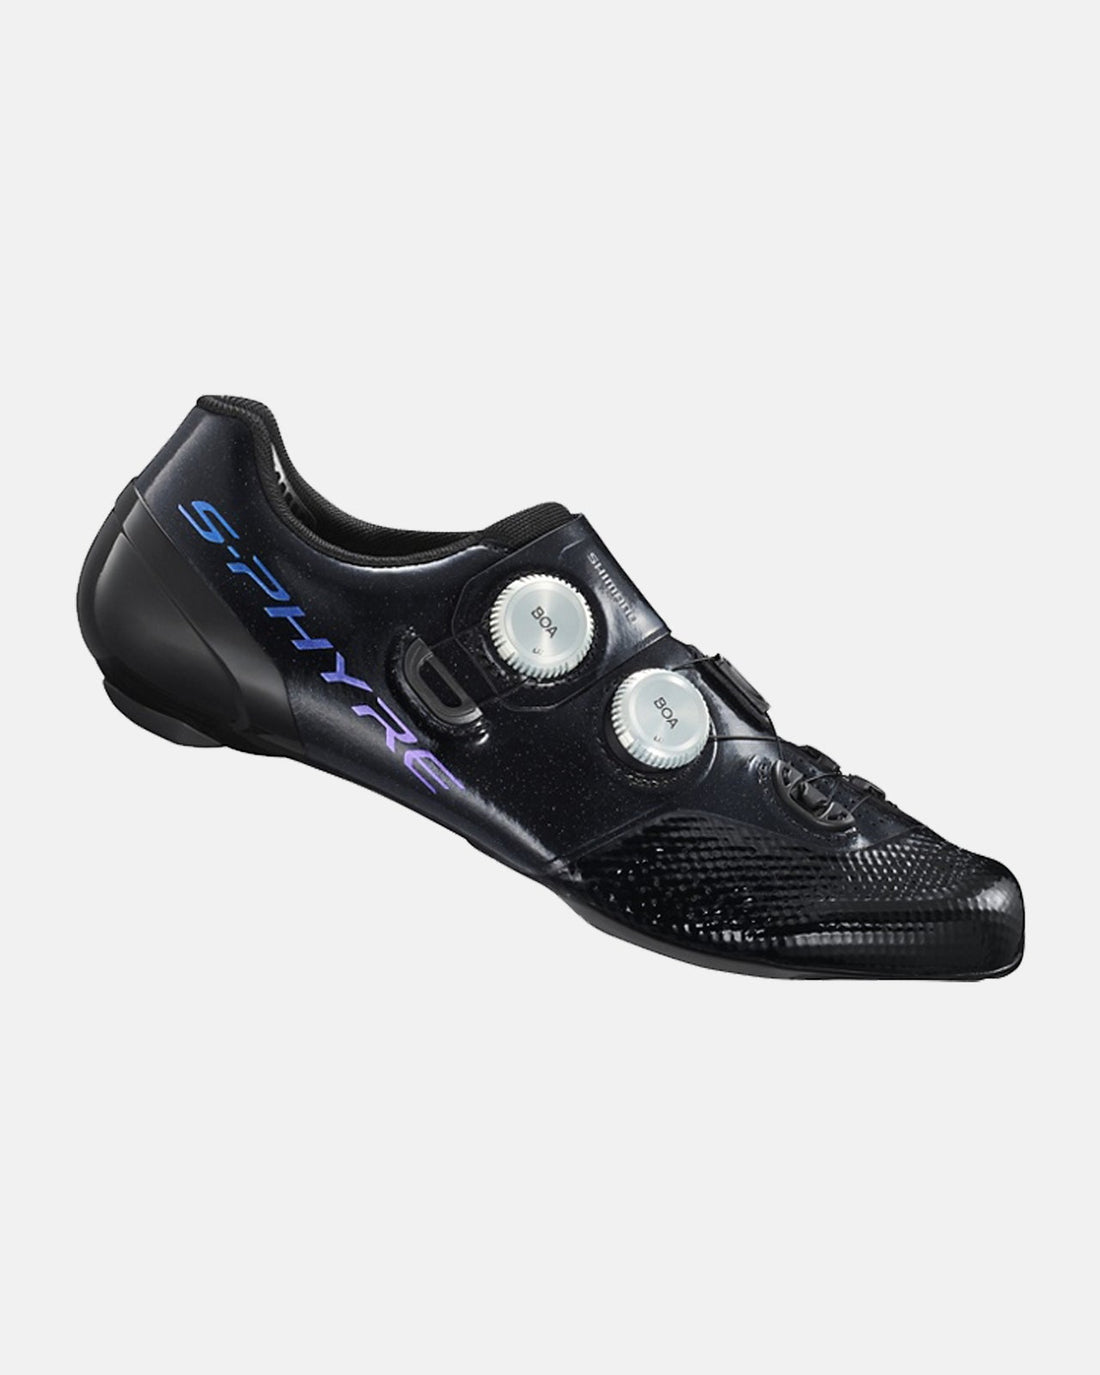 S-Phyre Road Shoes - SH-RC902S - S-Phyre